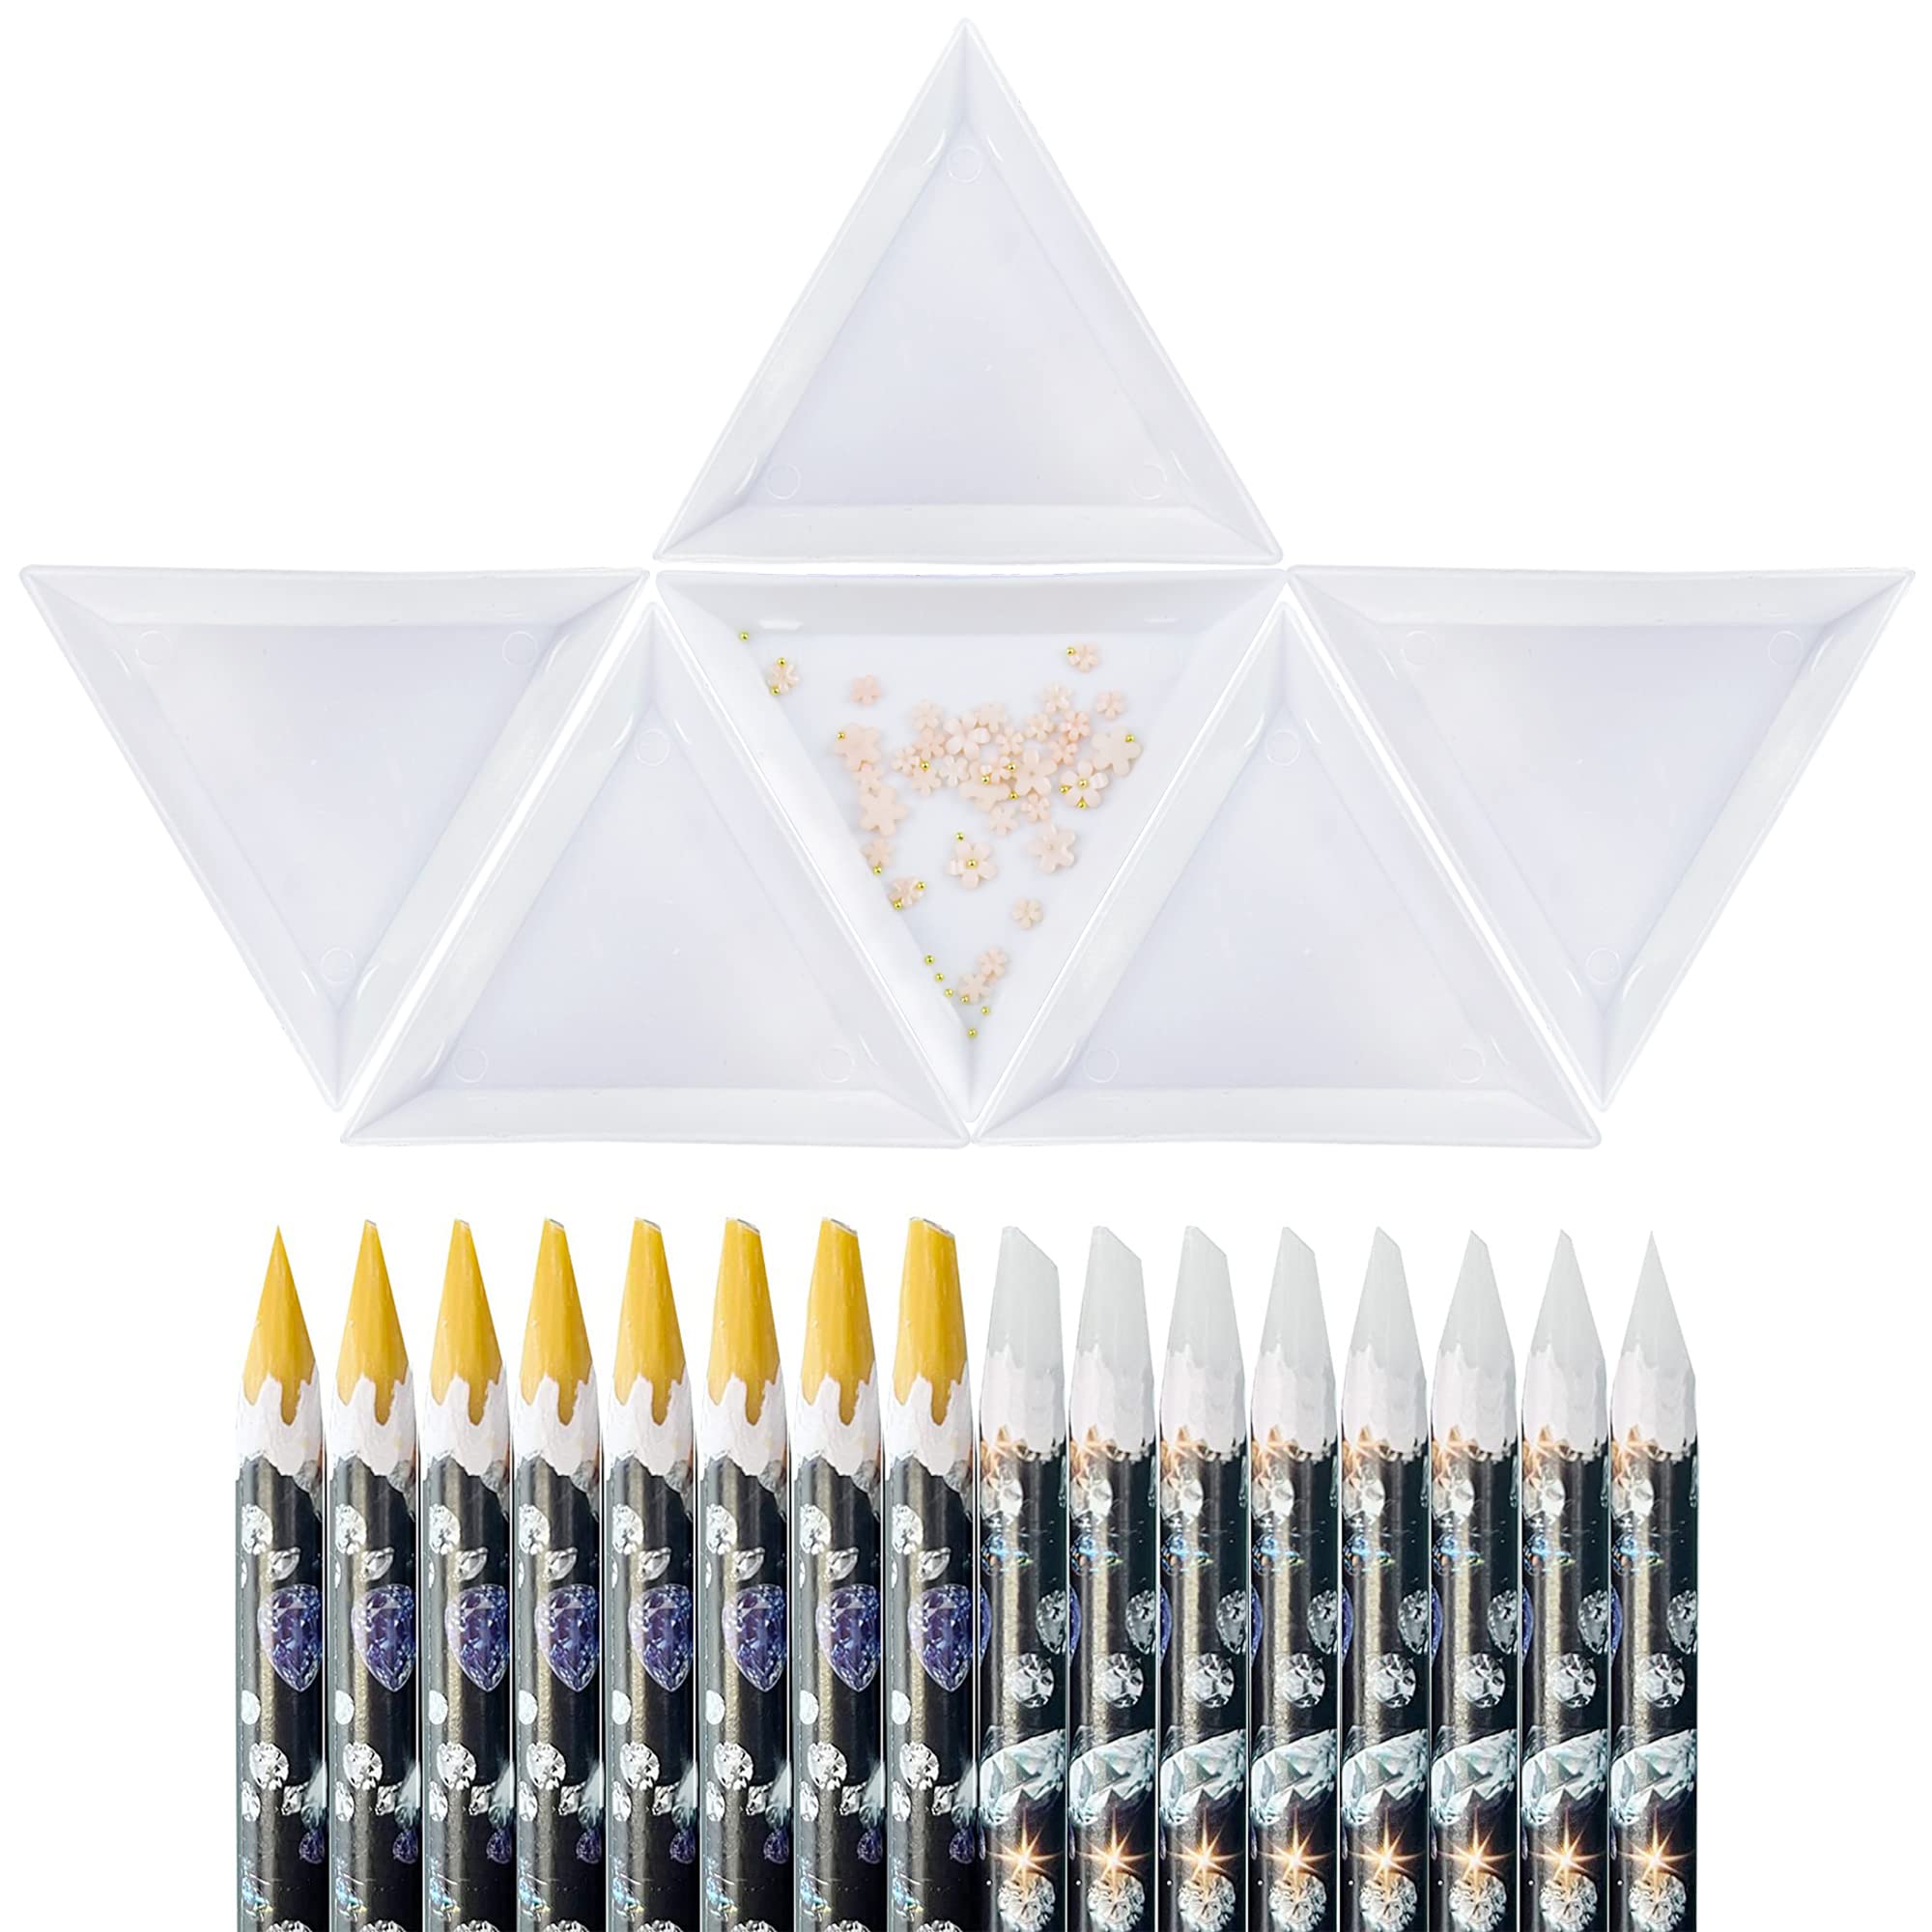 Wax Pencil for Diamond Painting Set, 22 PCS Pickup Tools,16 Wax Pens, 6 Sorting Trays, Rhinestone Applicator Dotting Pen for Picking Up Gems Pearls Beads for Nail Art